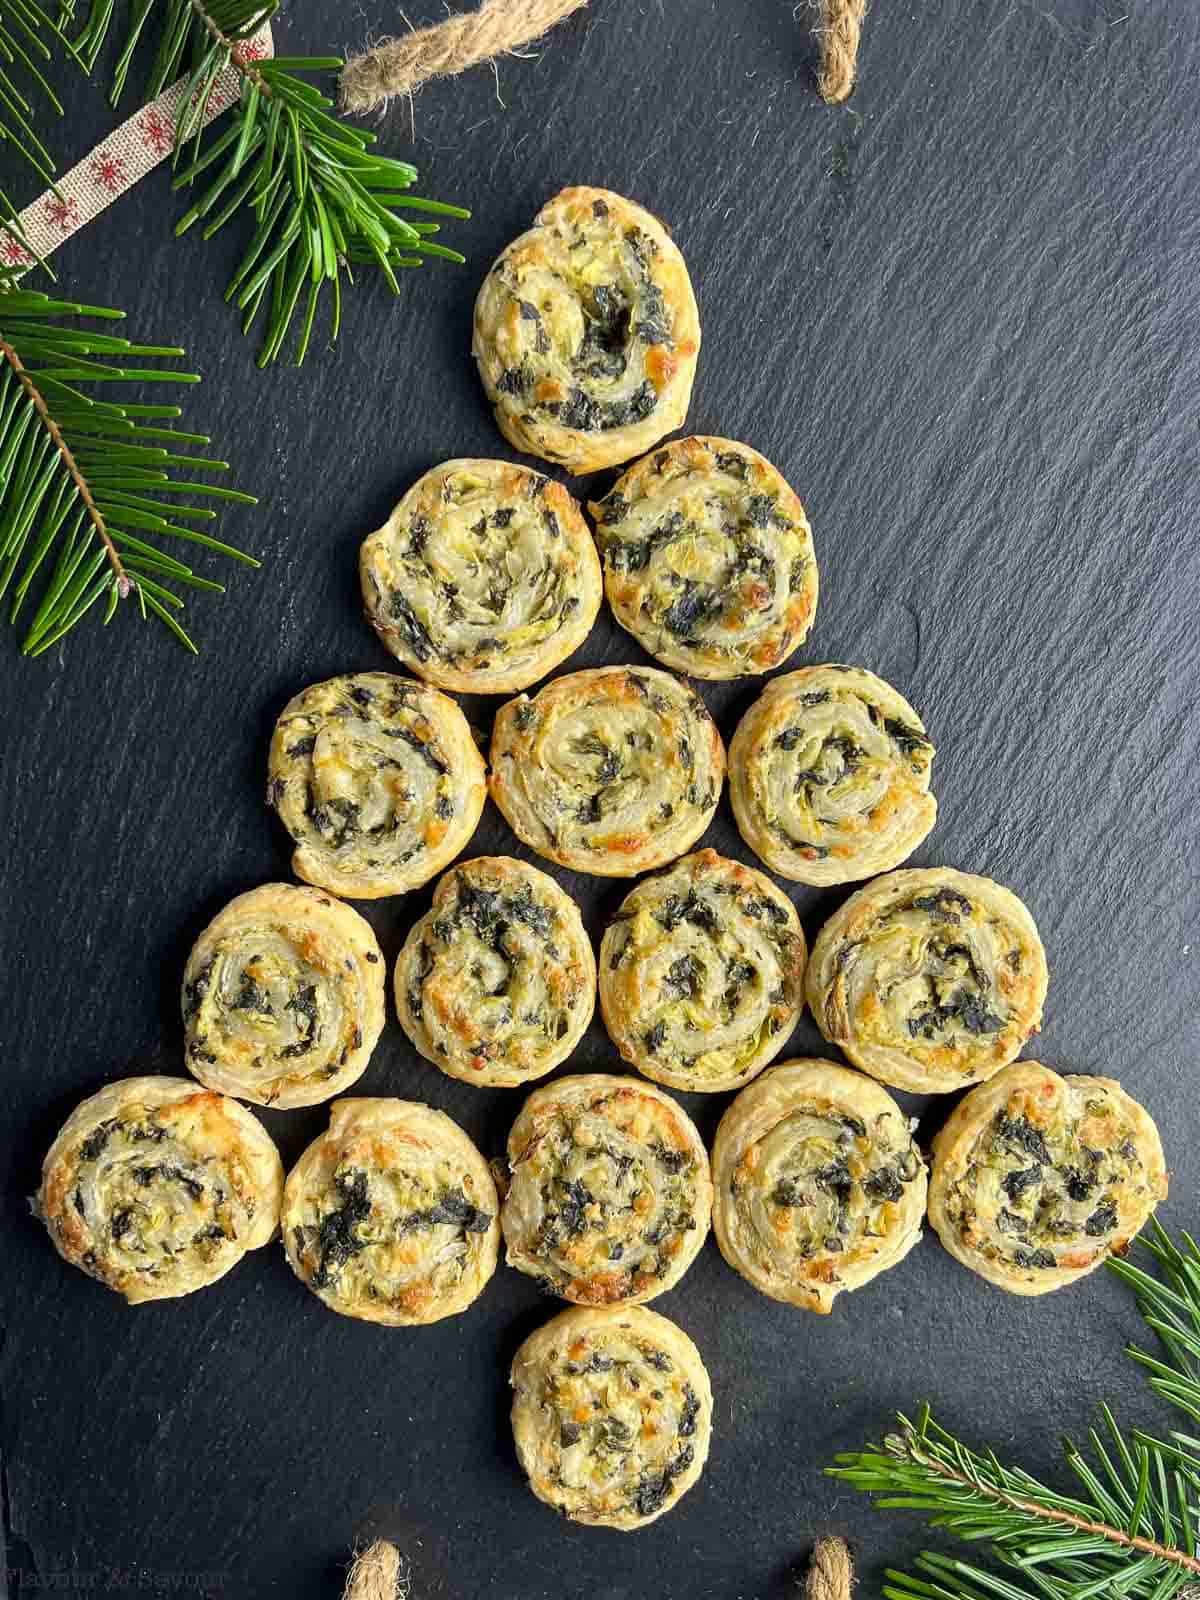 Puff Pastry Spinach Artichoke Pinwheels arranged in the shape of a Christmas tree.